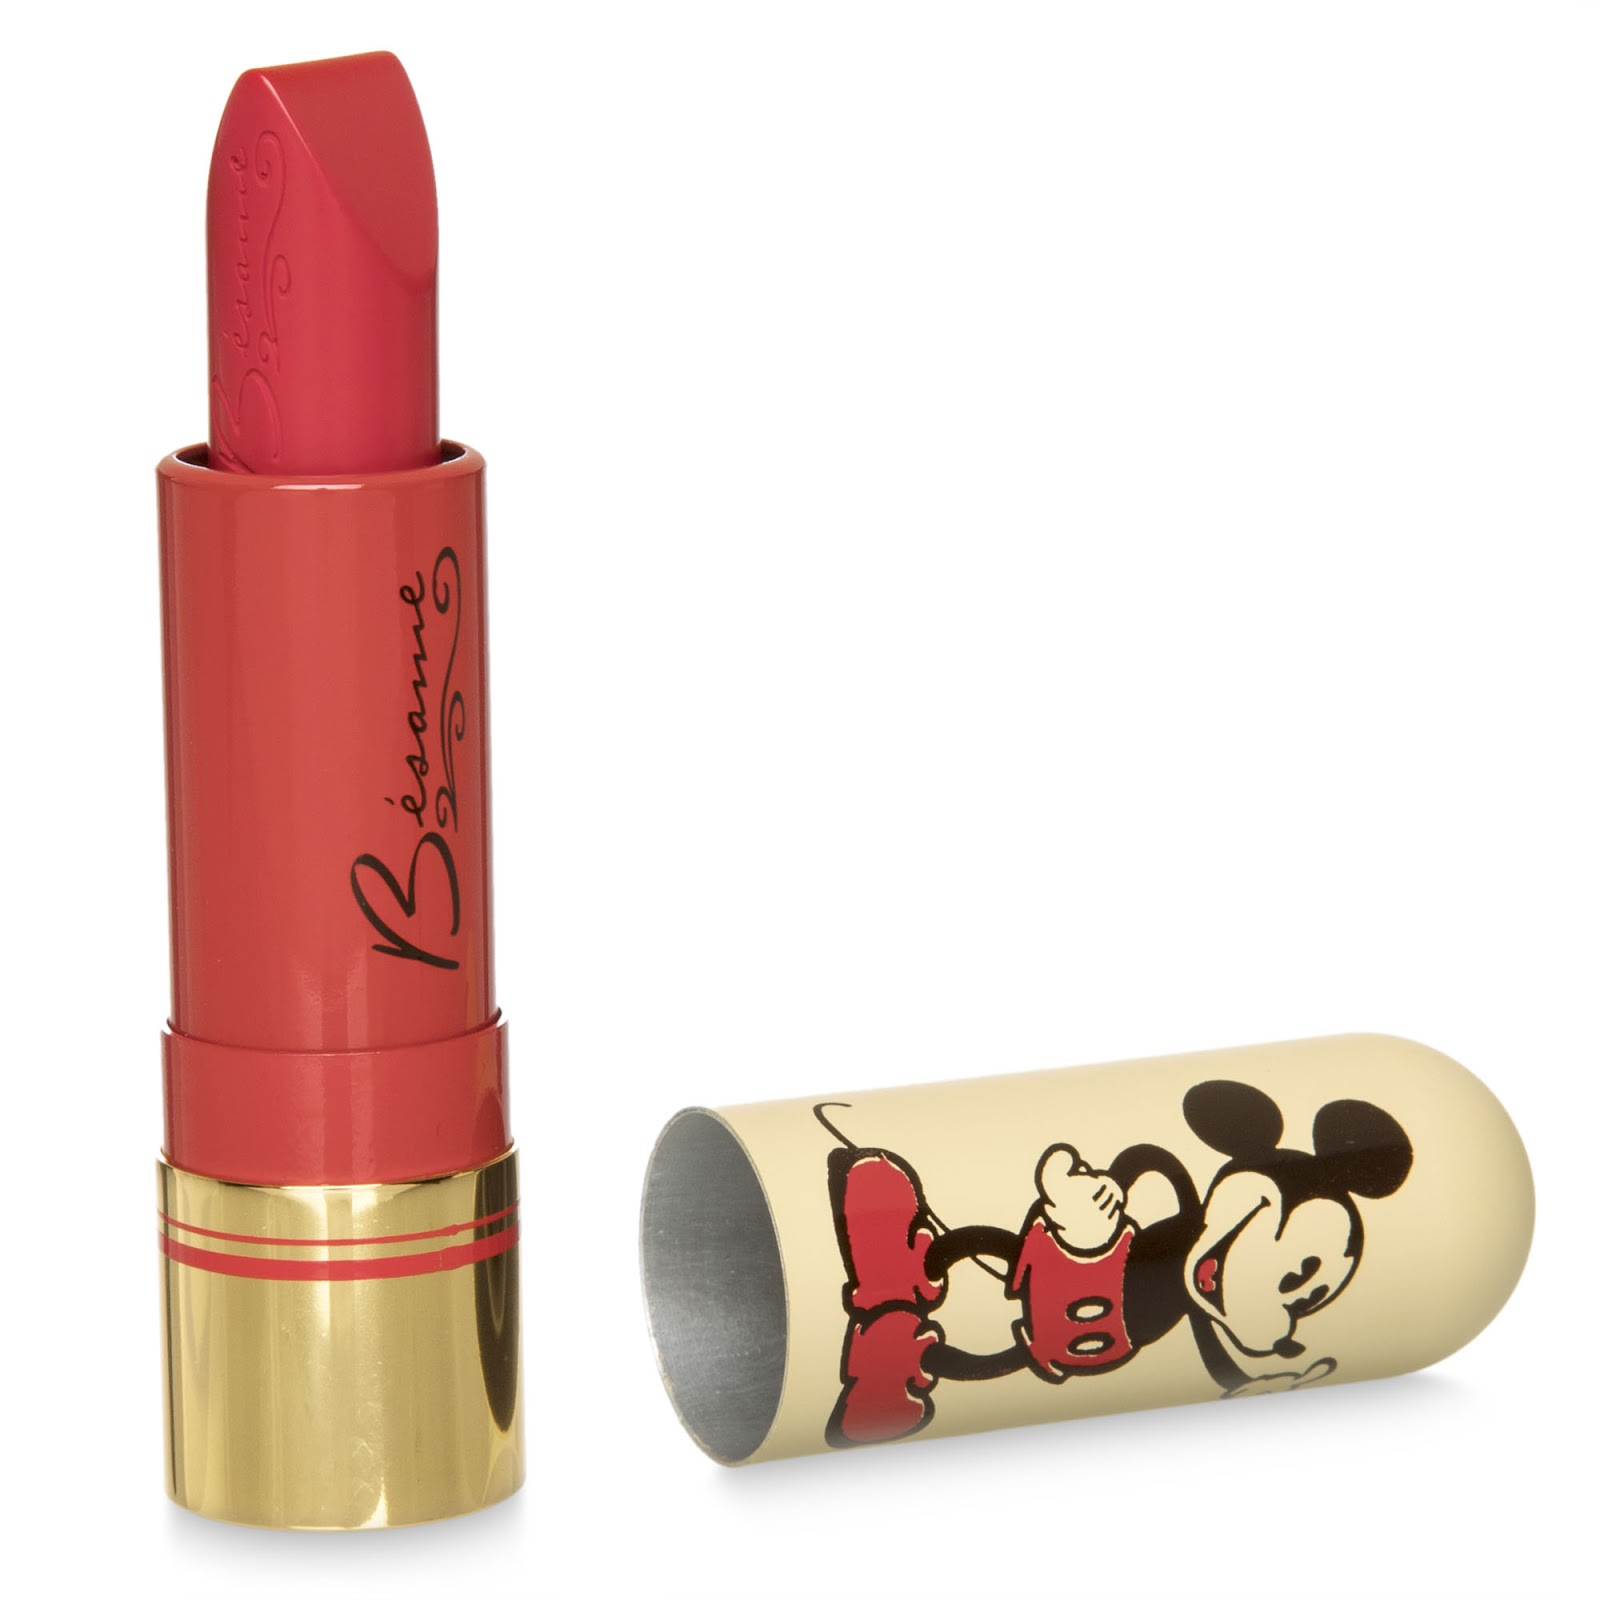 Valentine’s Day Gifts and Experiences Available Now at Disney Stores and sh...